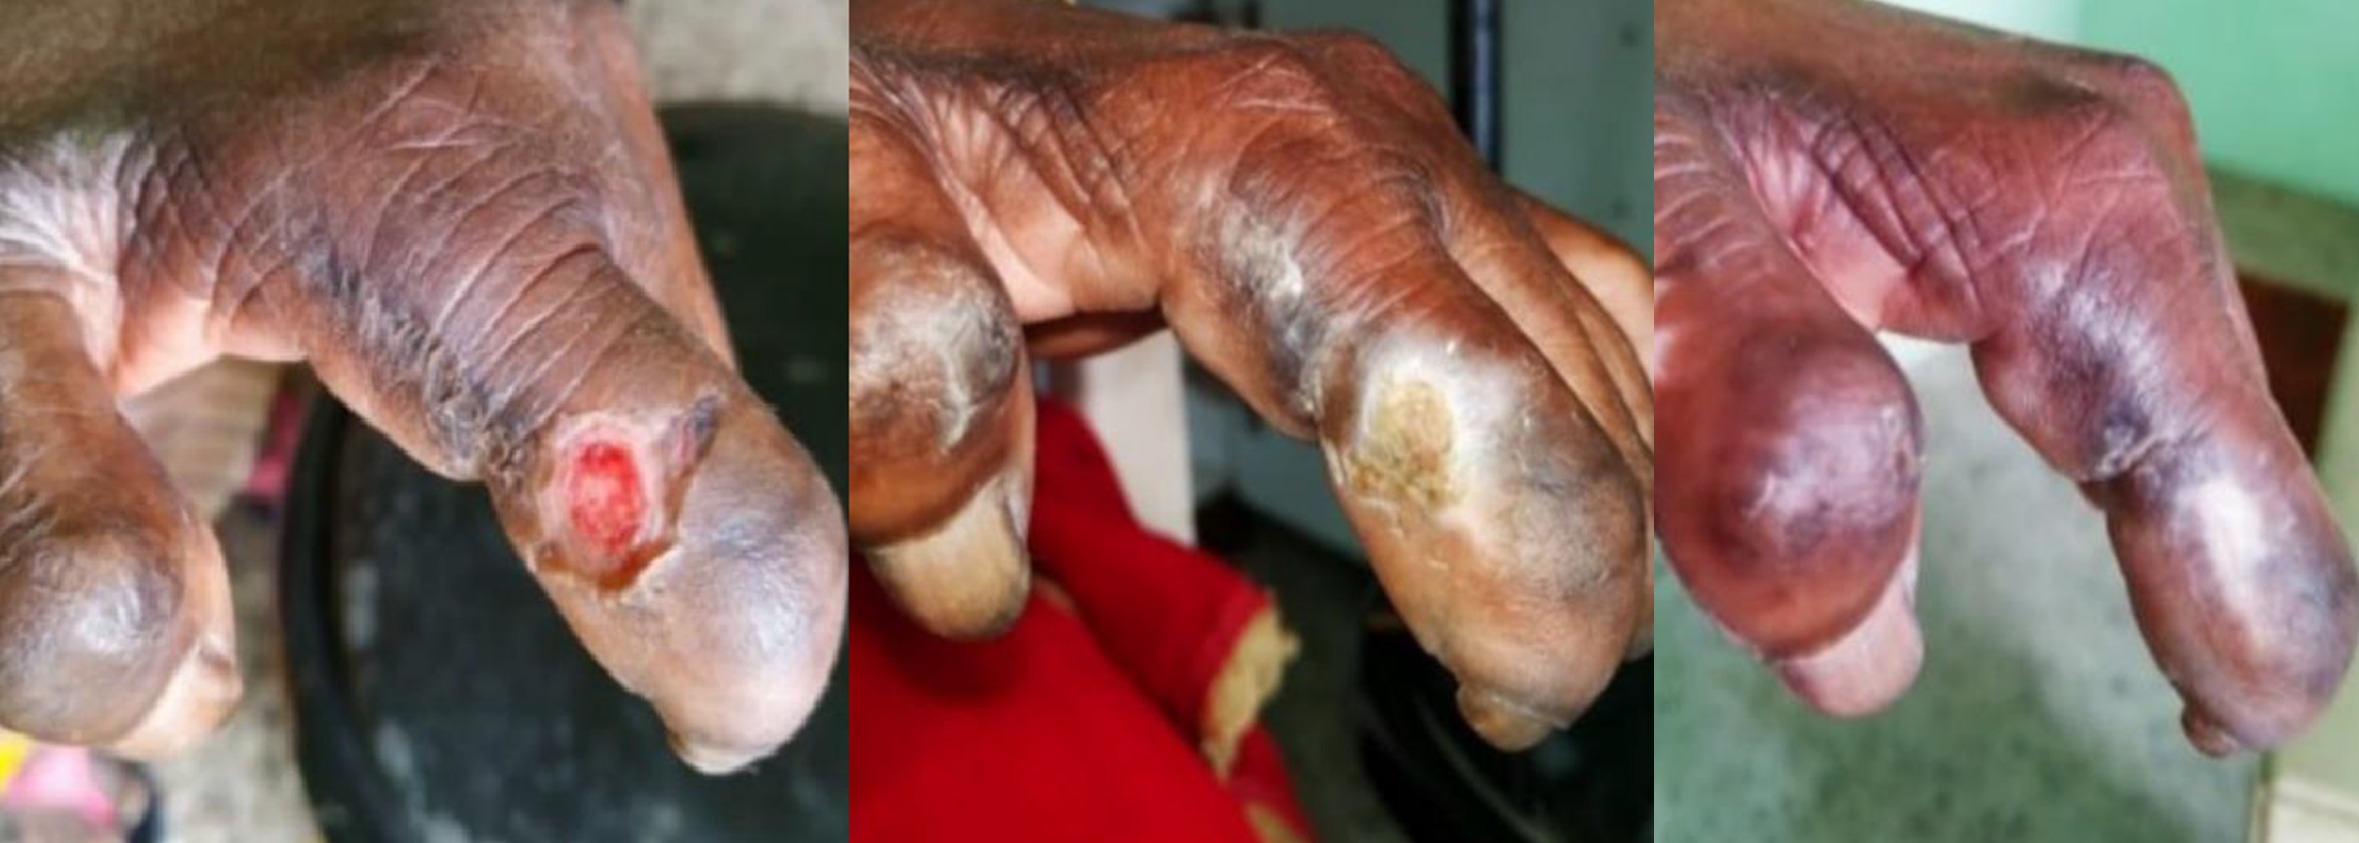 Leprosy ulcer on hand